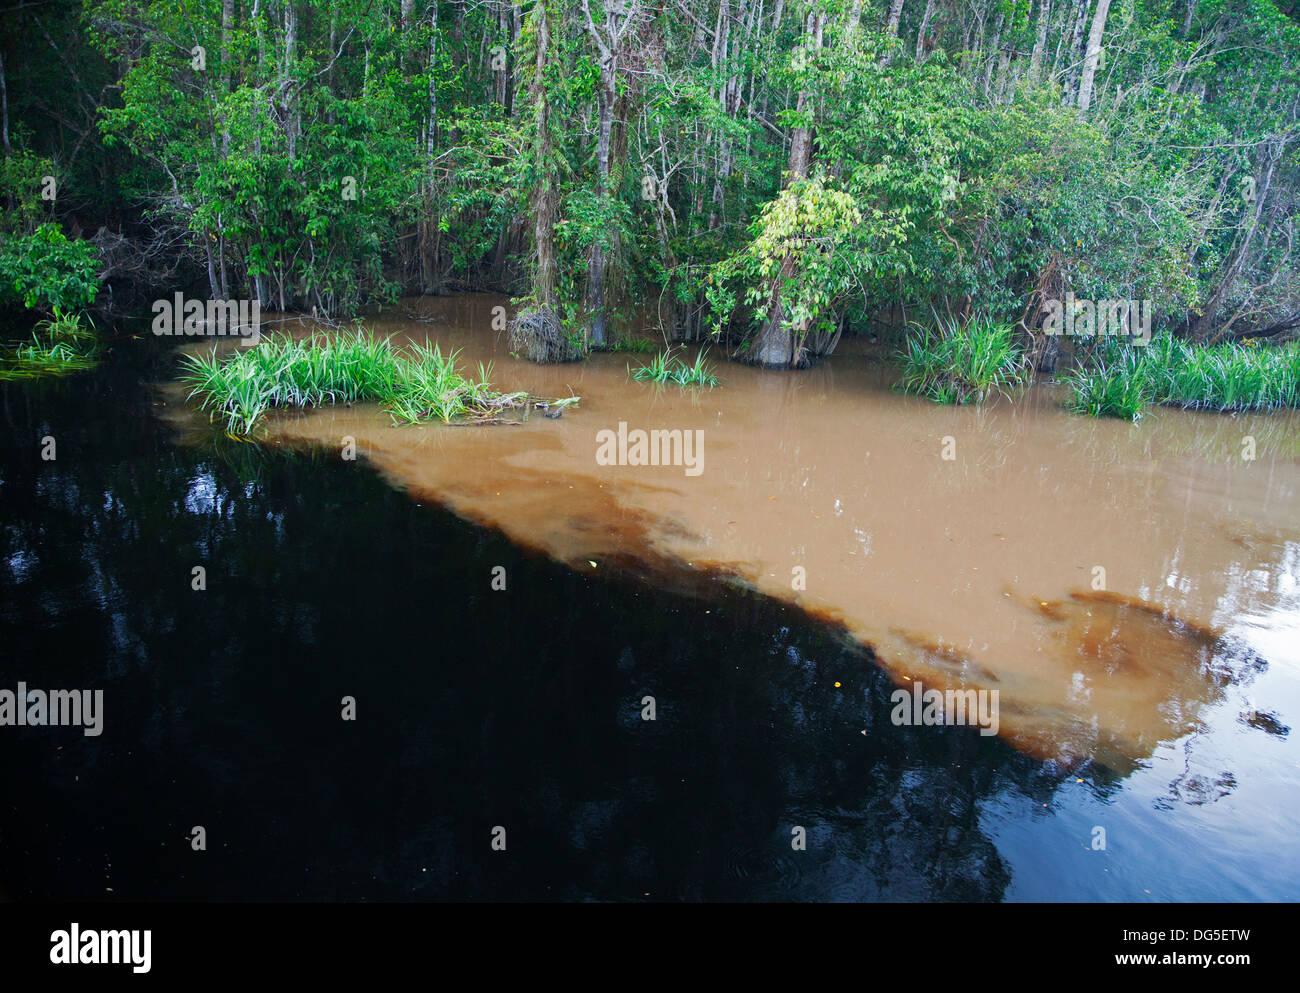 Natural clean black water of Sekonyer Kanan tributary flowing into muddy water of the main Sekonyer River polluted by illegal gold mining in Borneo Stock Photo